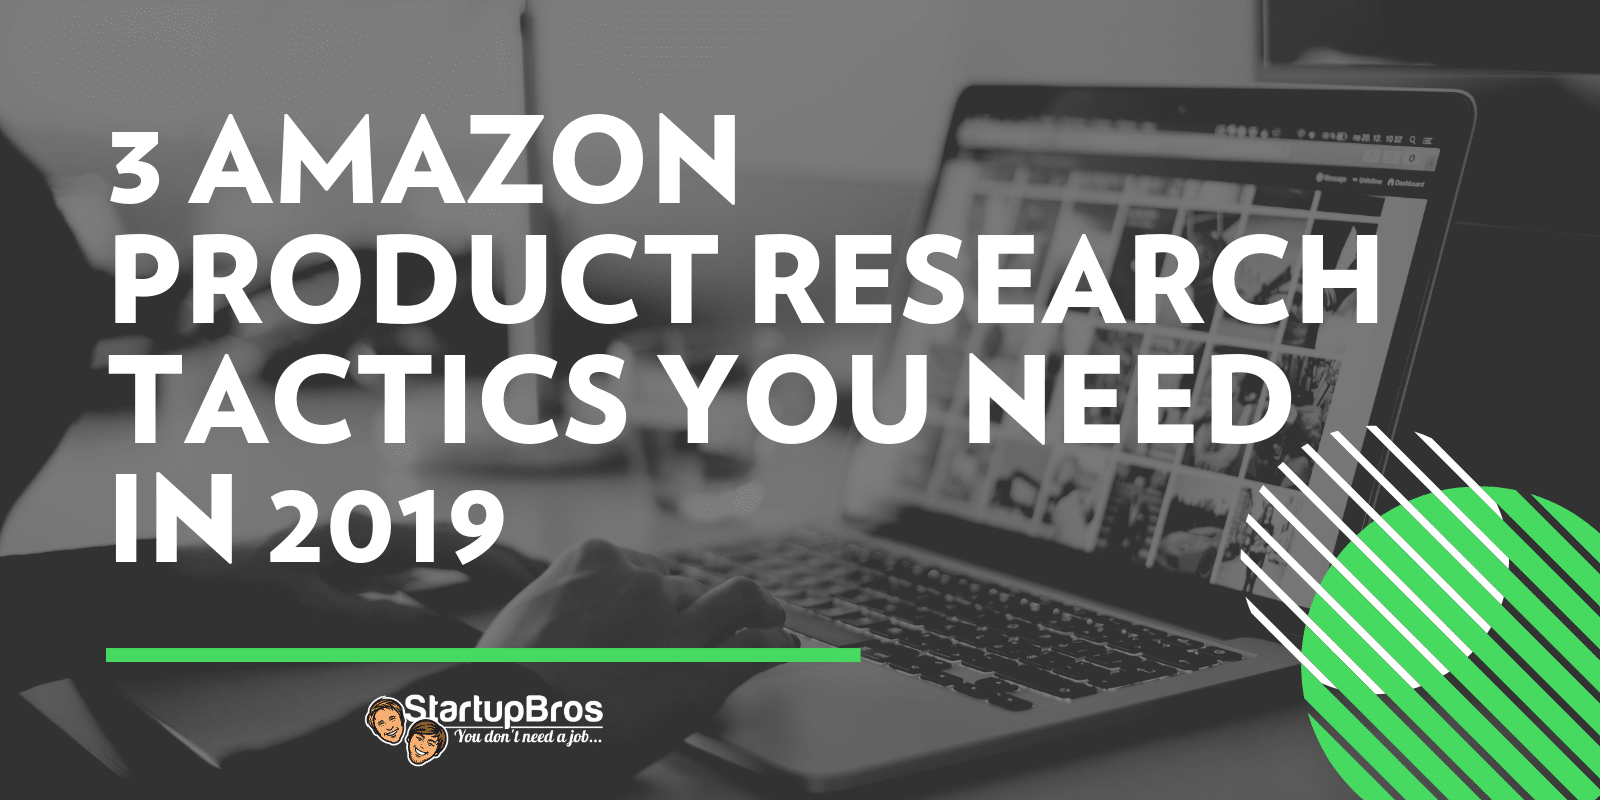 3 Amazon Product Research Tactics You Need